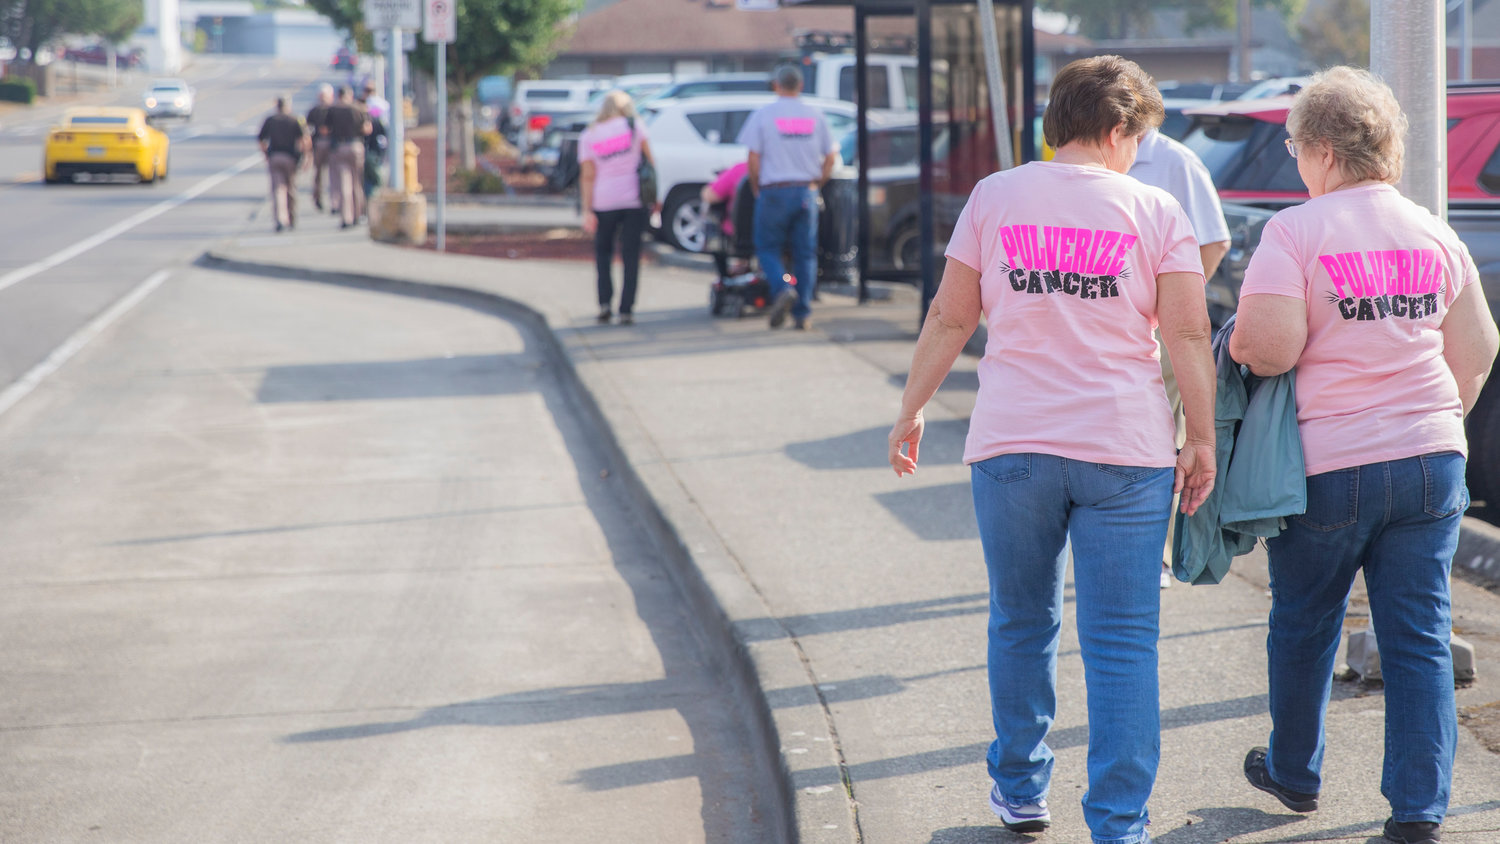 Participants sport “Pulverize Cancer,” shirts during a walk for Breast Cancer Awareness Month Friday morning in Chehalis.